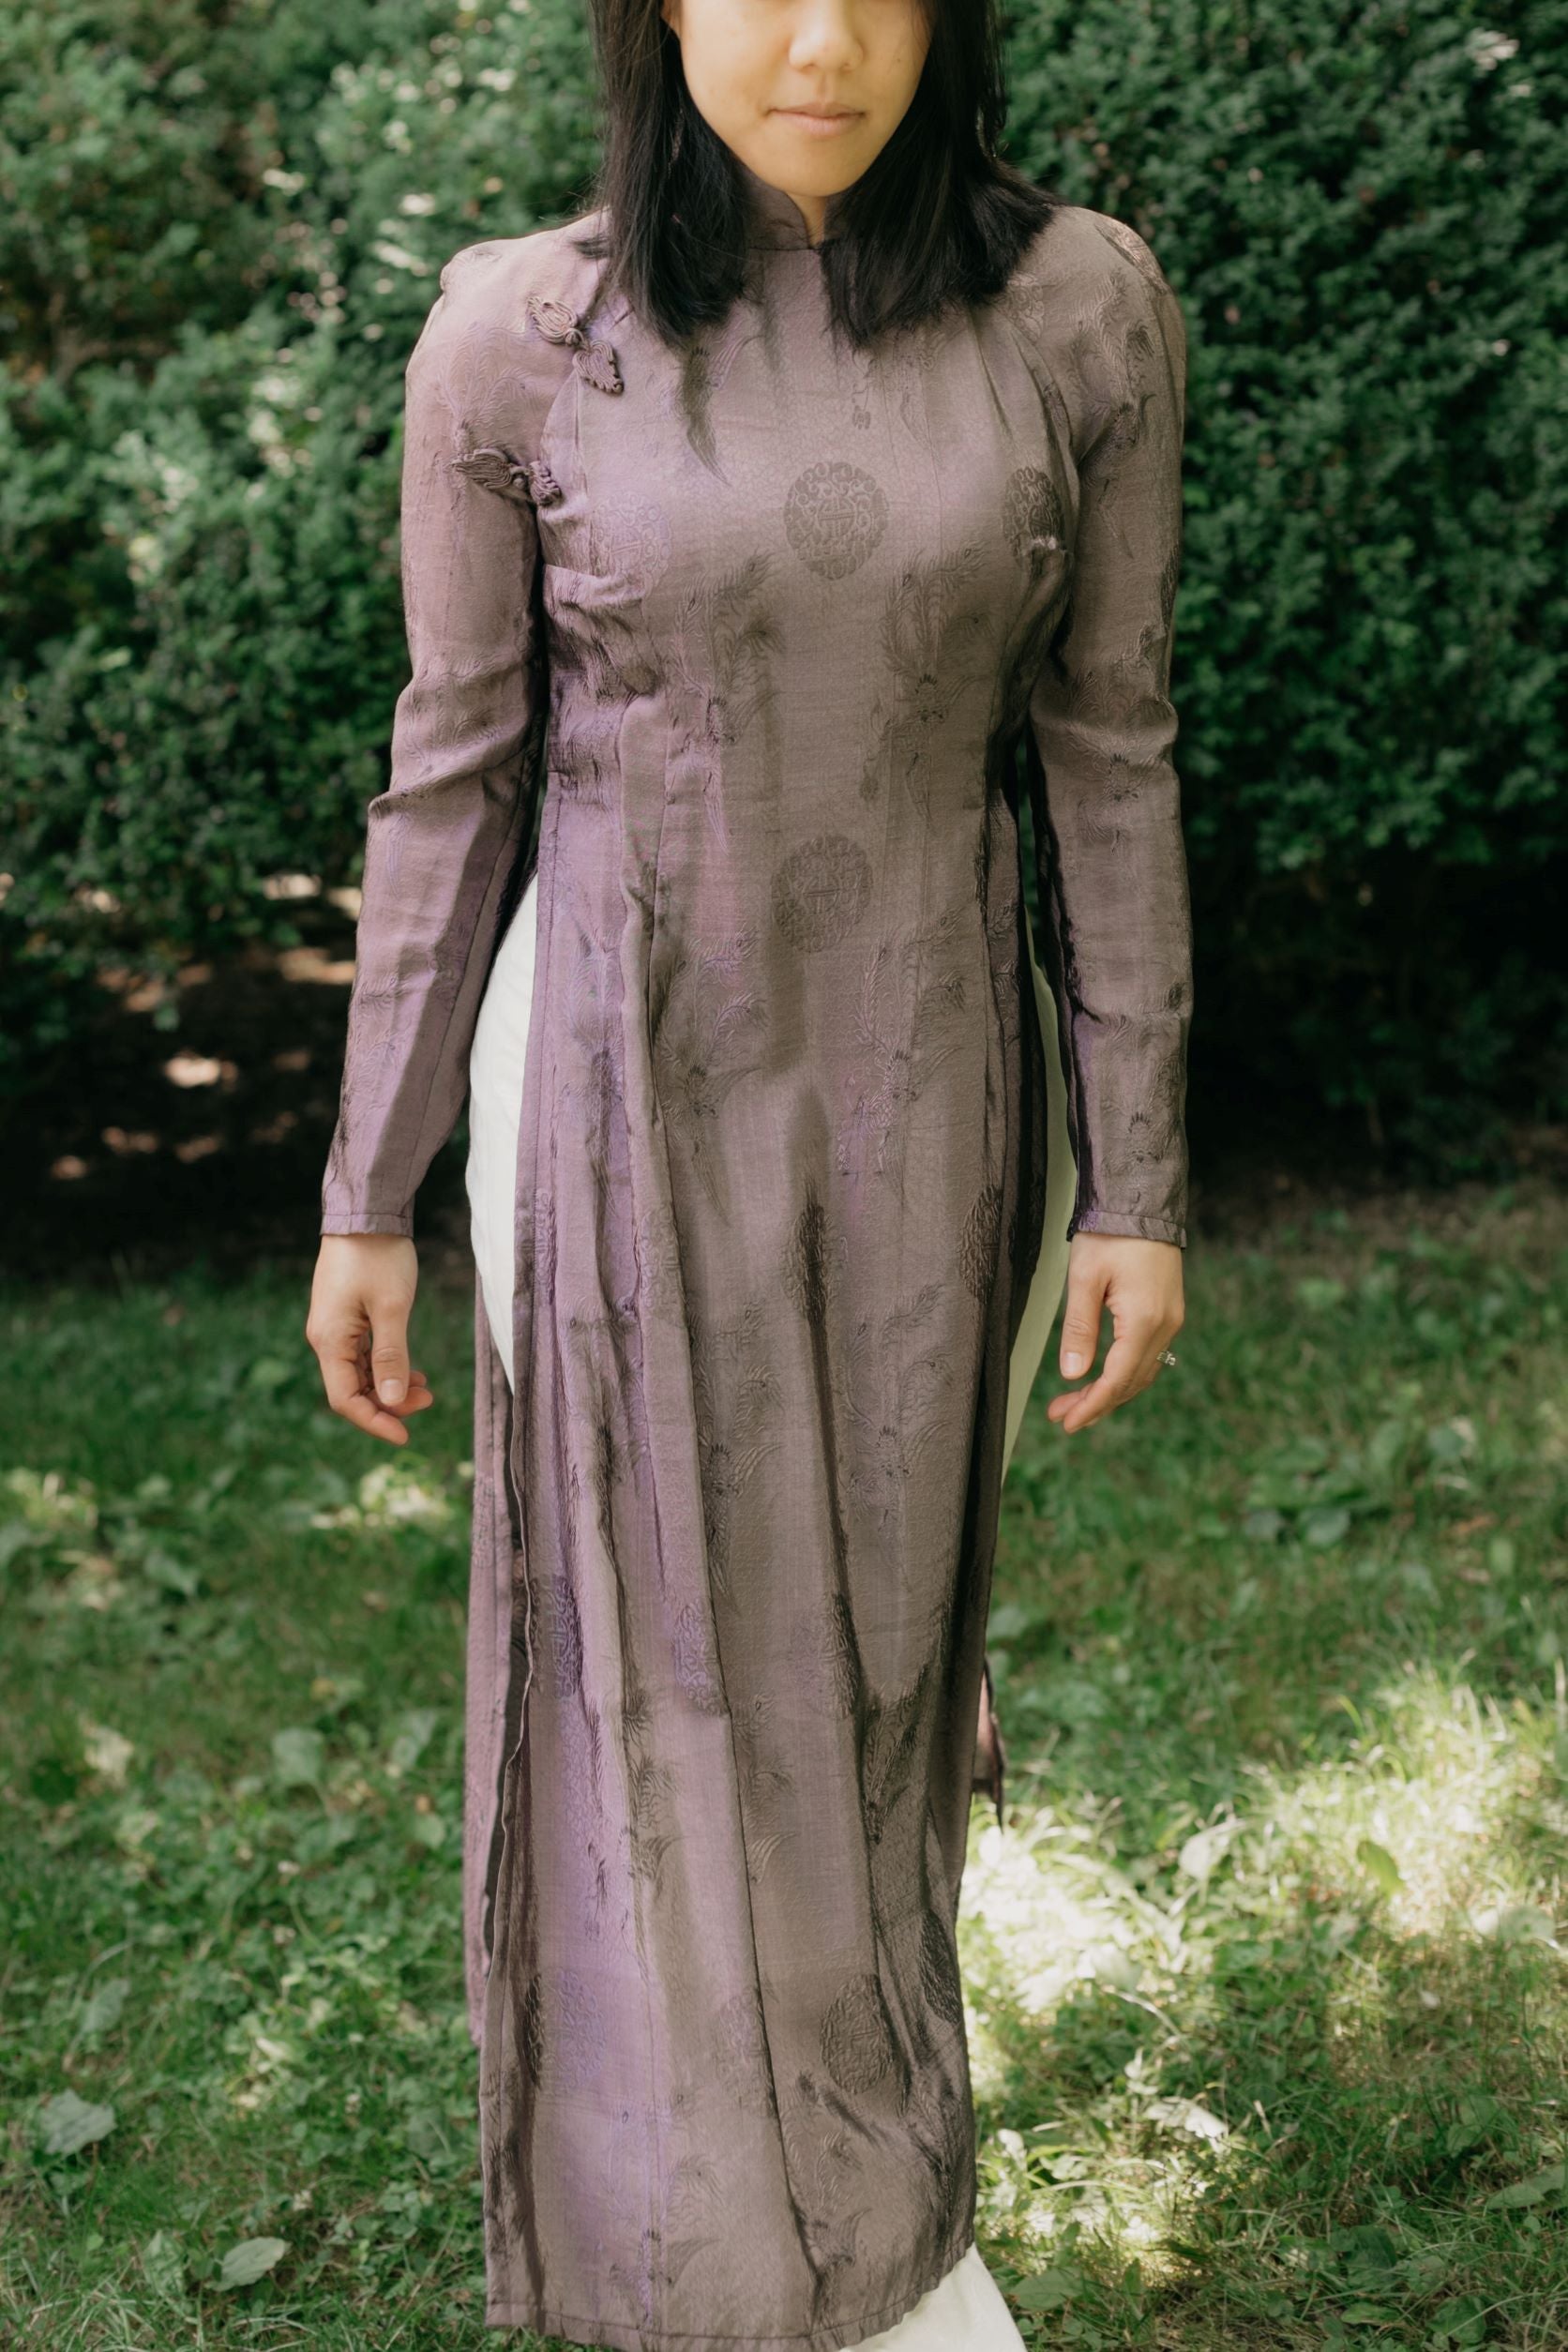 Vietnamese American woman wearing a purple silk Ao Dai tunic with white pants and sandals. She is walking toward the camera in a lawn with shrubs in the background.